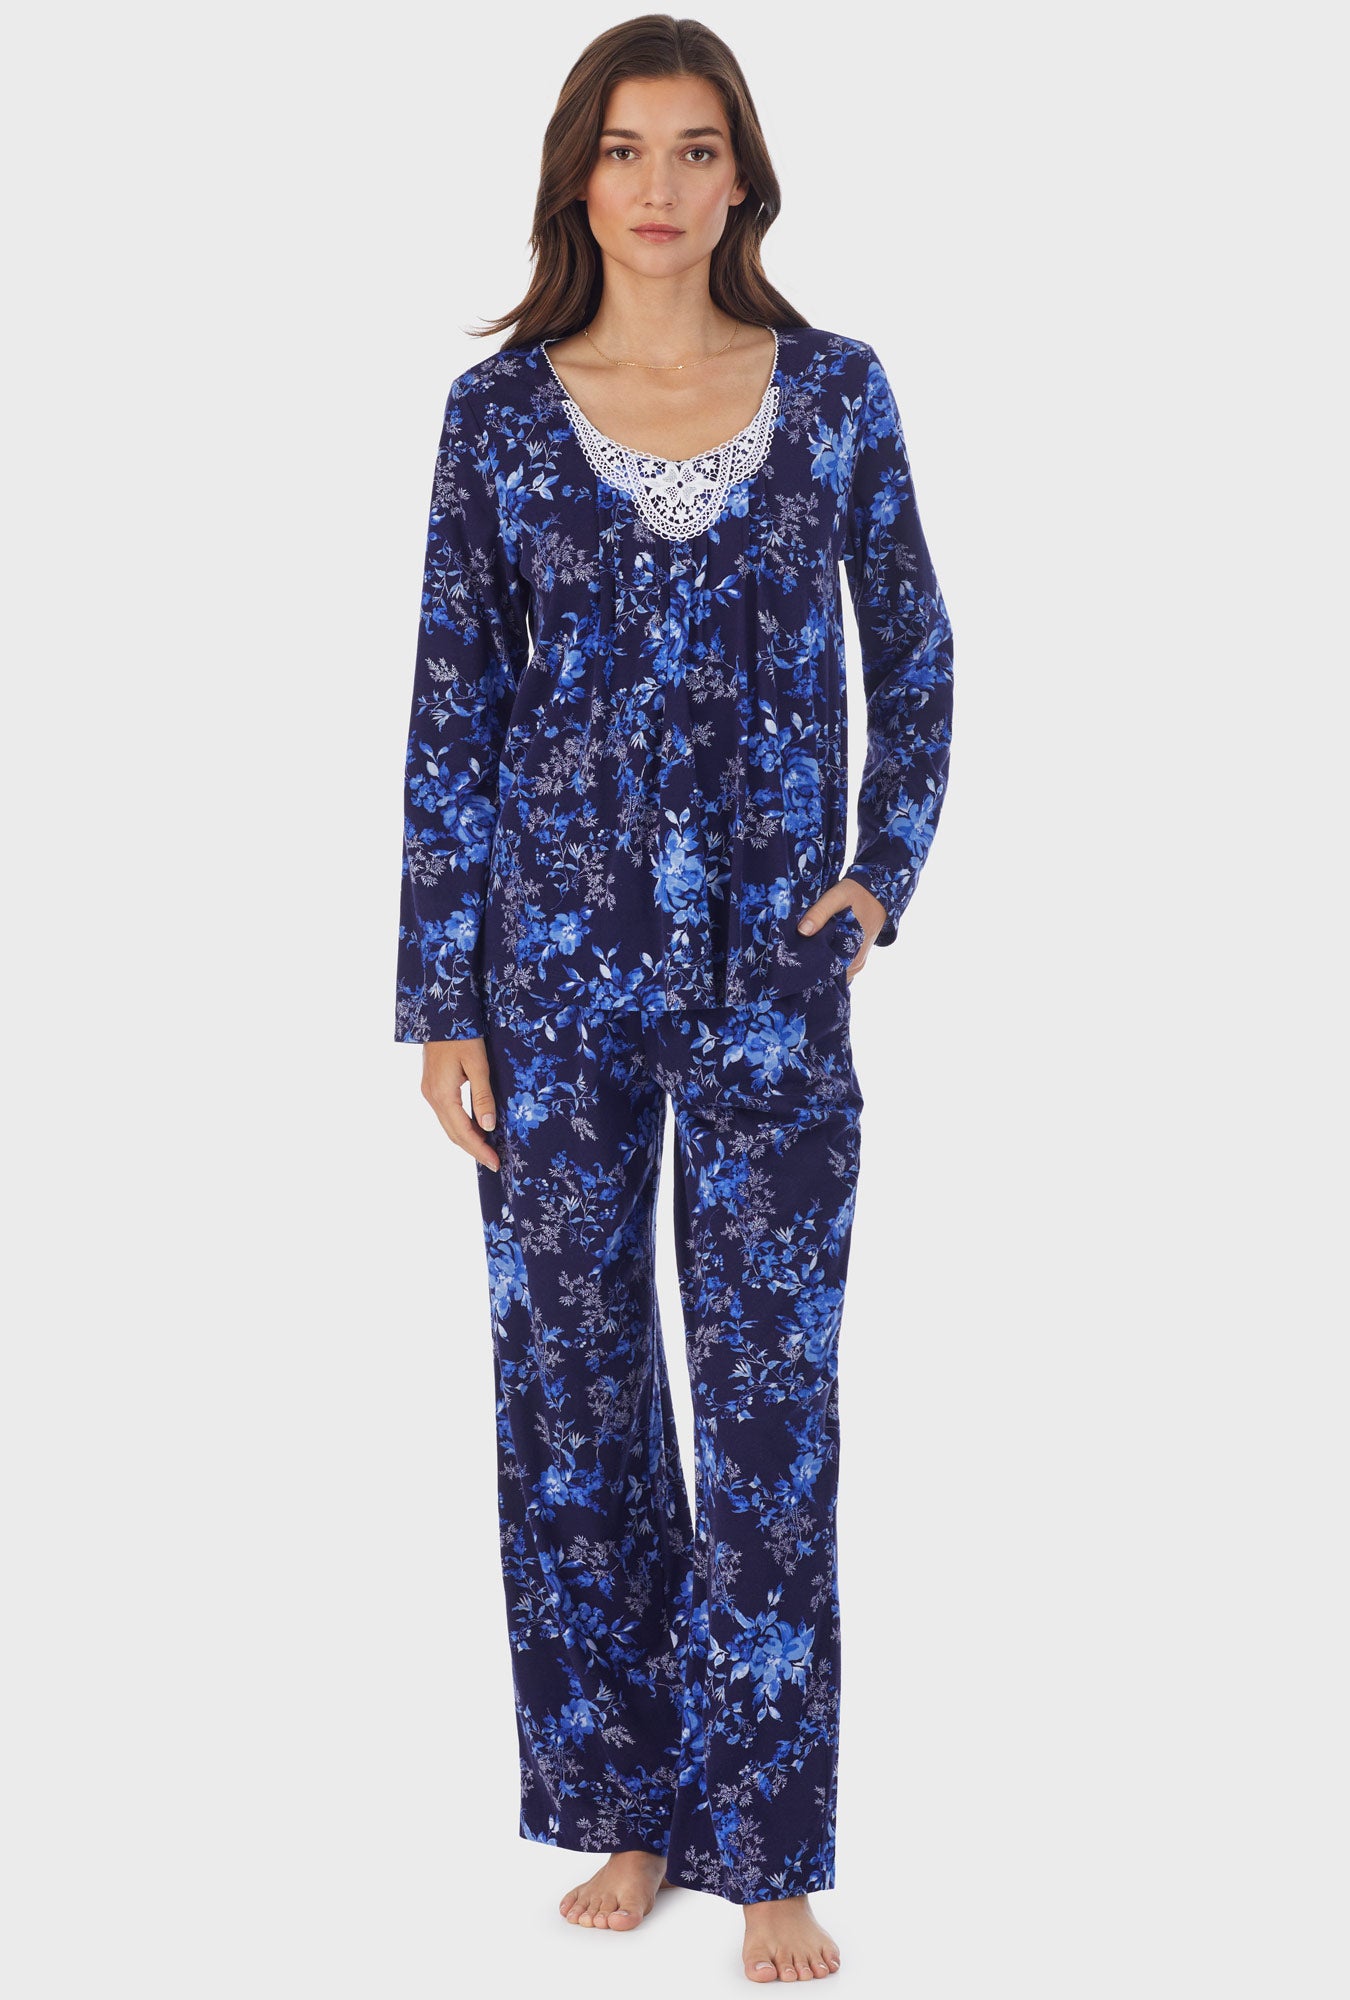 A lady wearing long sleeve cotton long pajama set with navy floral print.